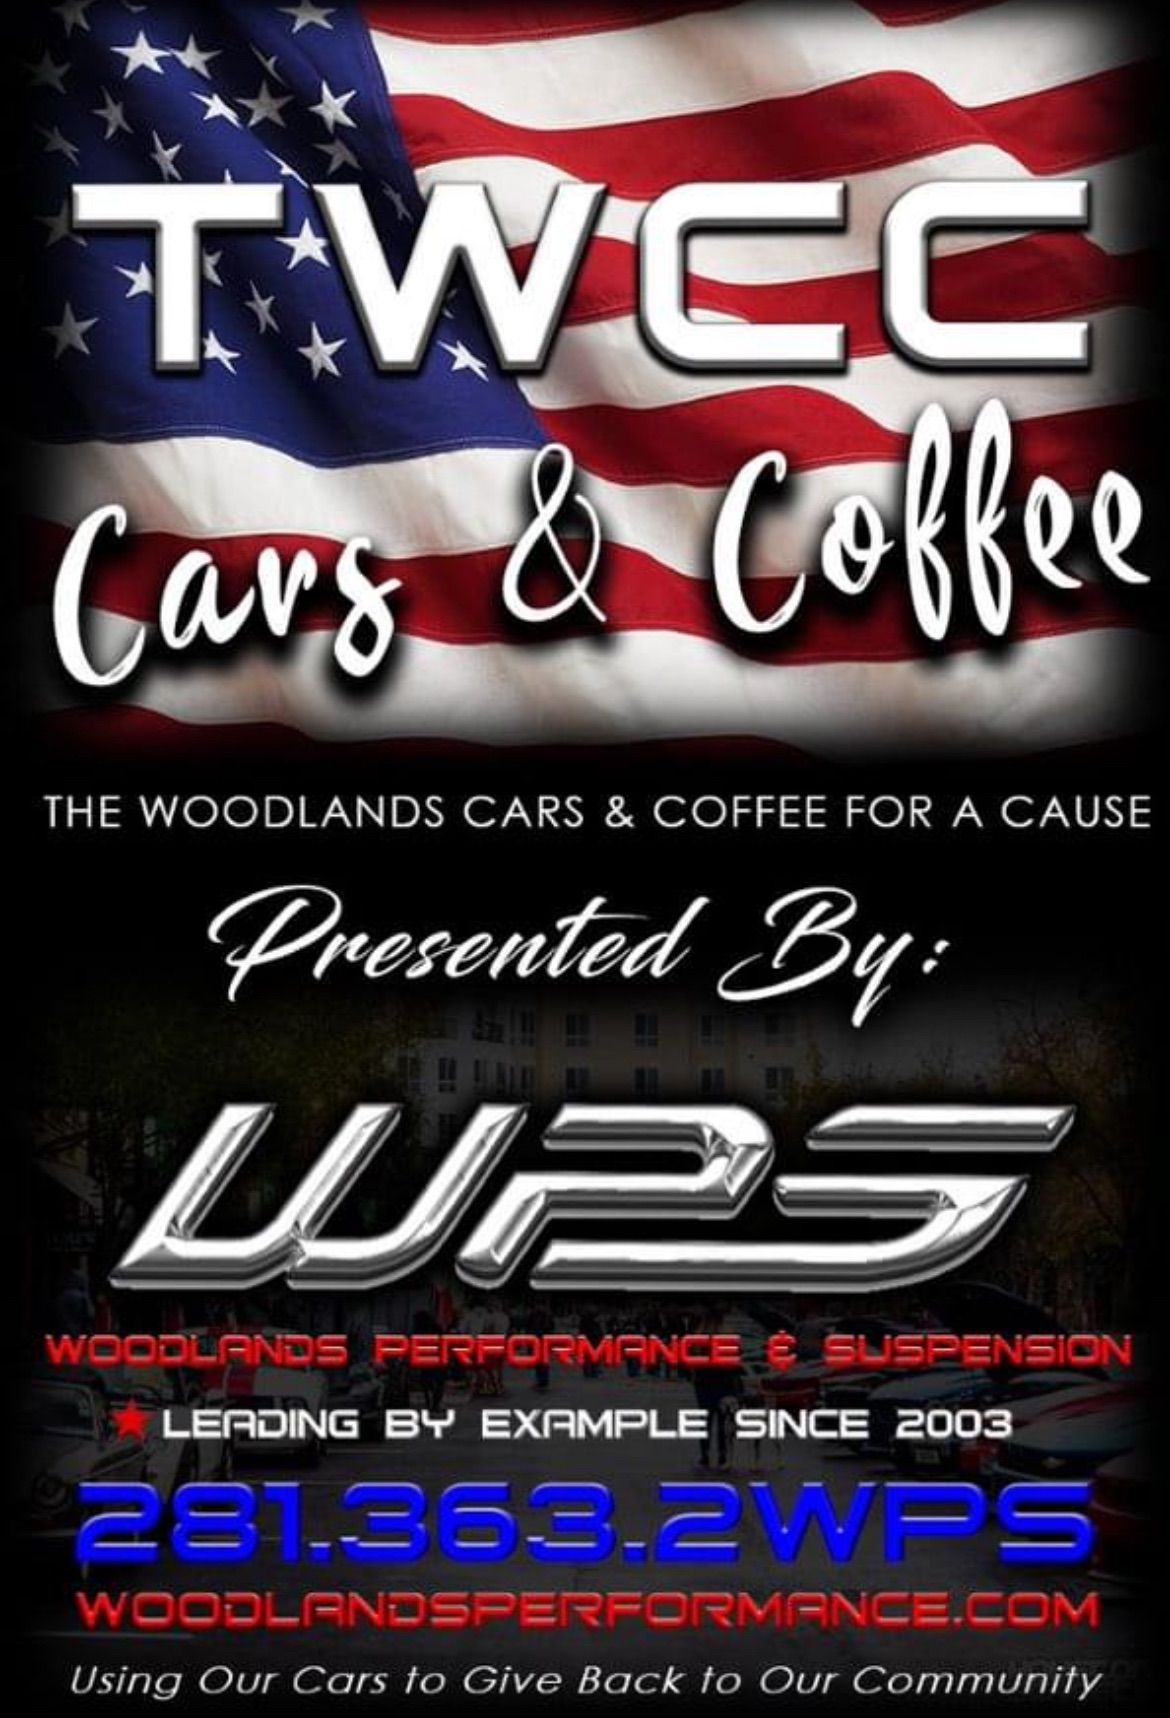 The Woodlands Cars & Coffee for a Cause 